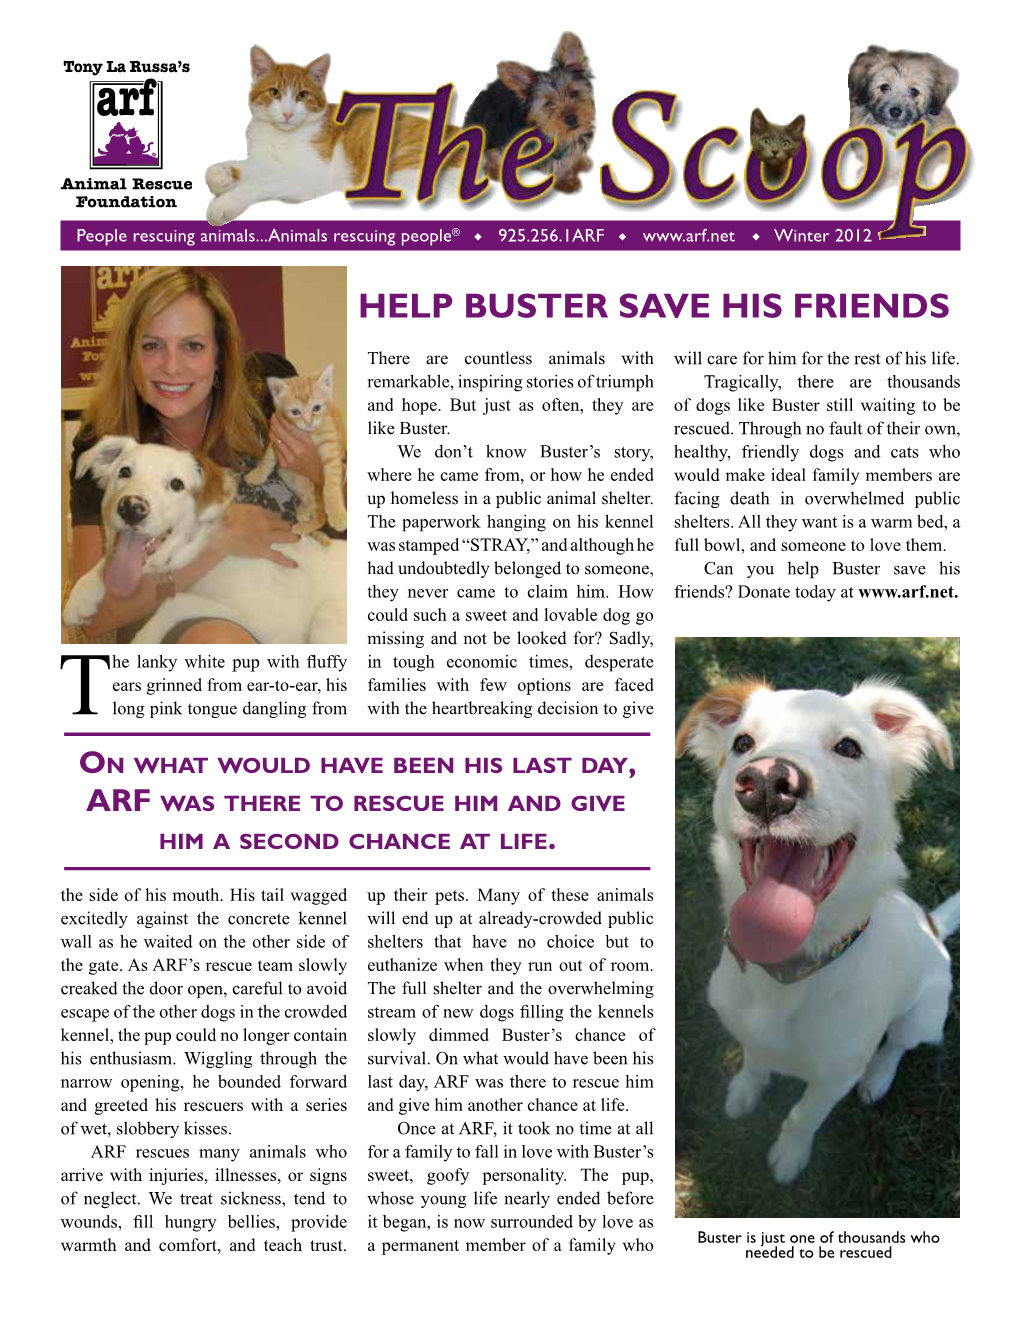 Help Buster Save His Friends